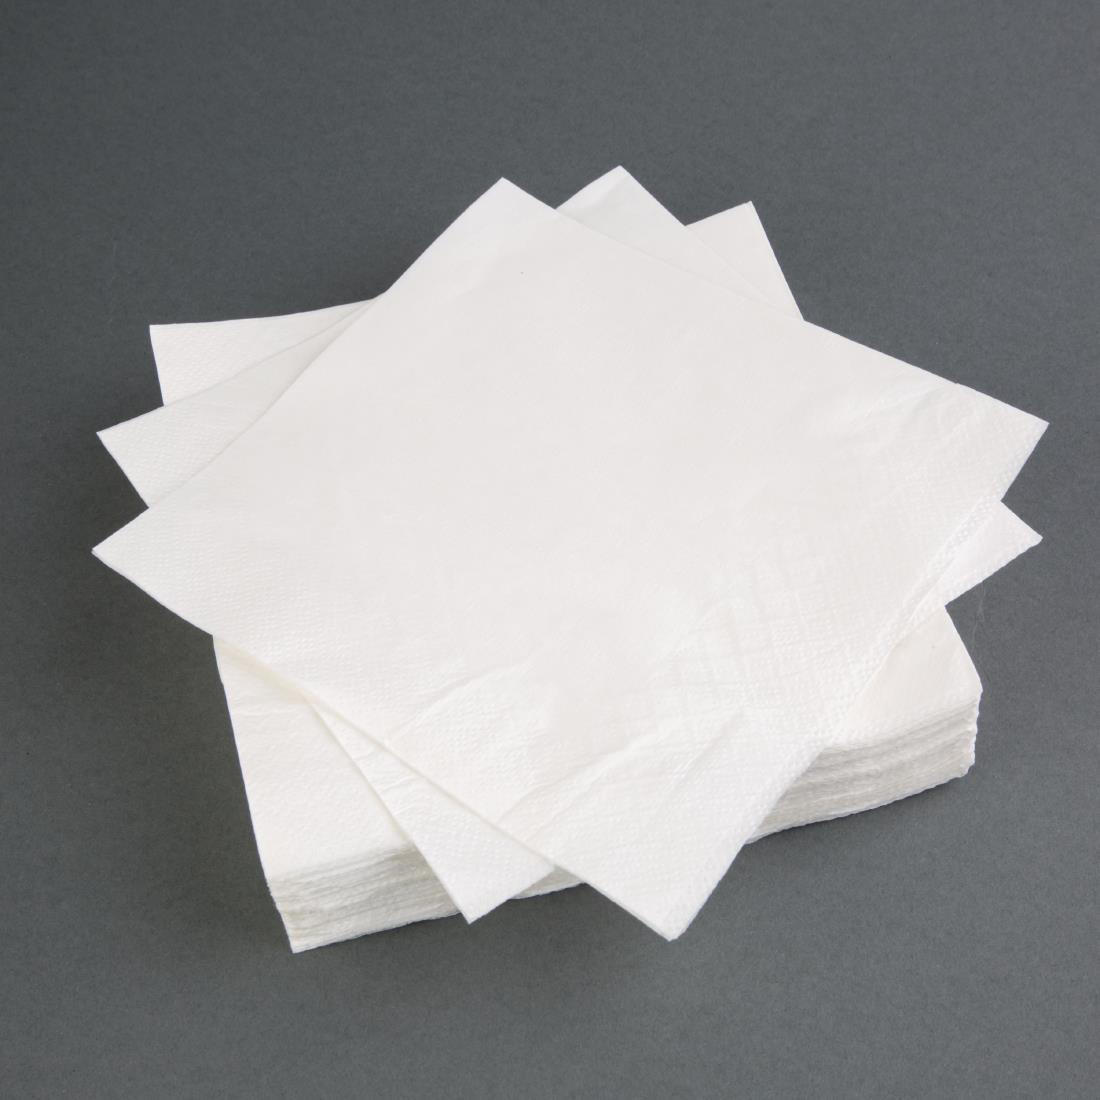 Fiesta Recyclable Lunch Napkin White 30x30cm 2ply 1/4 Fold (Pack of 250) - CM563  - 4